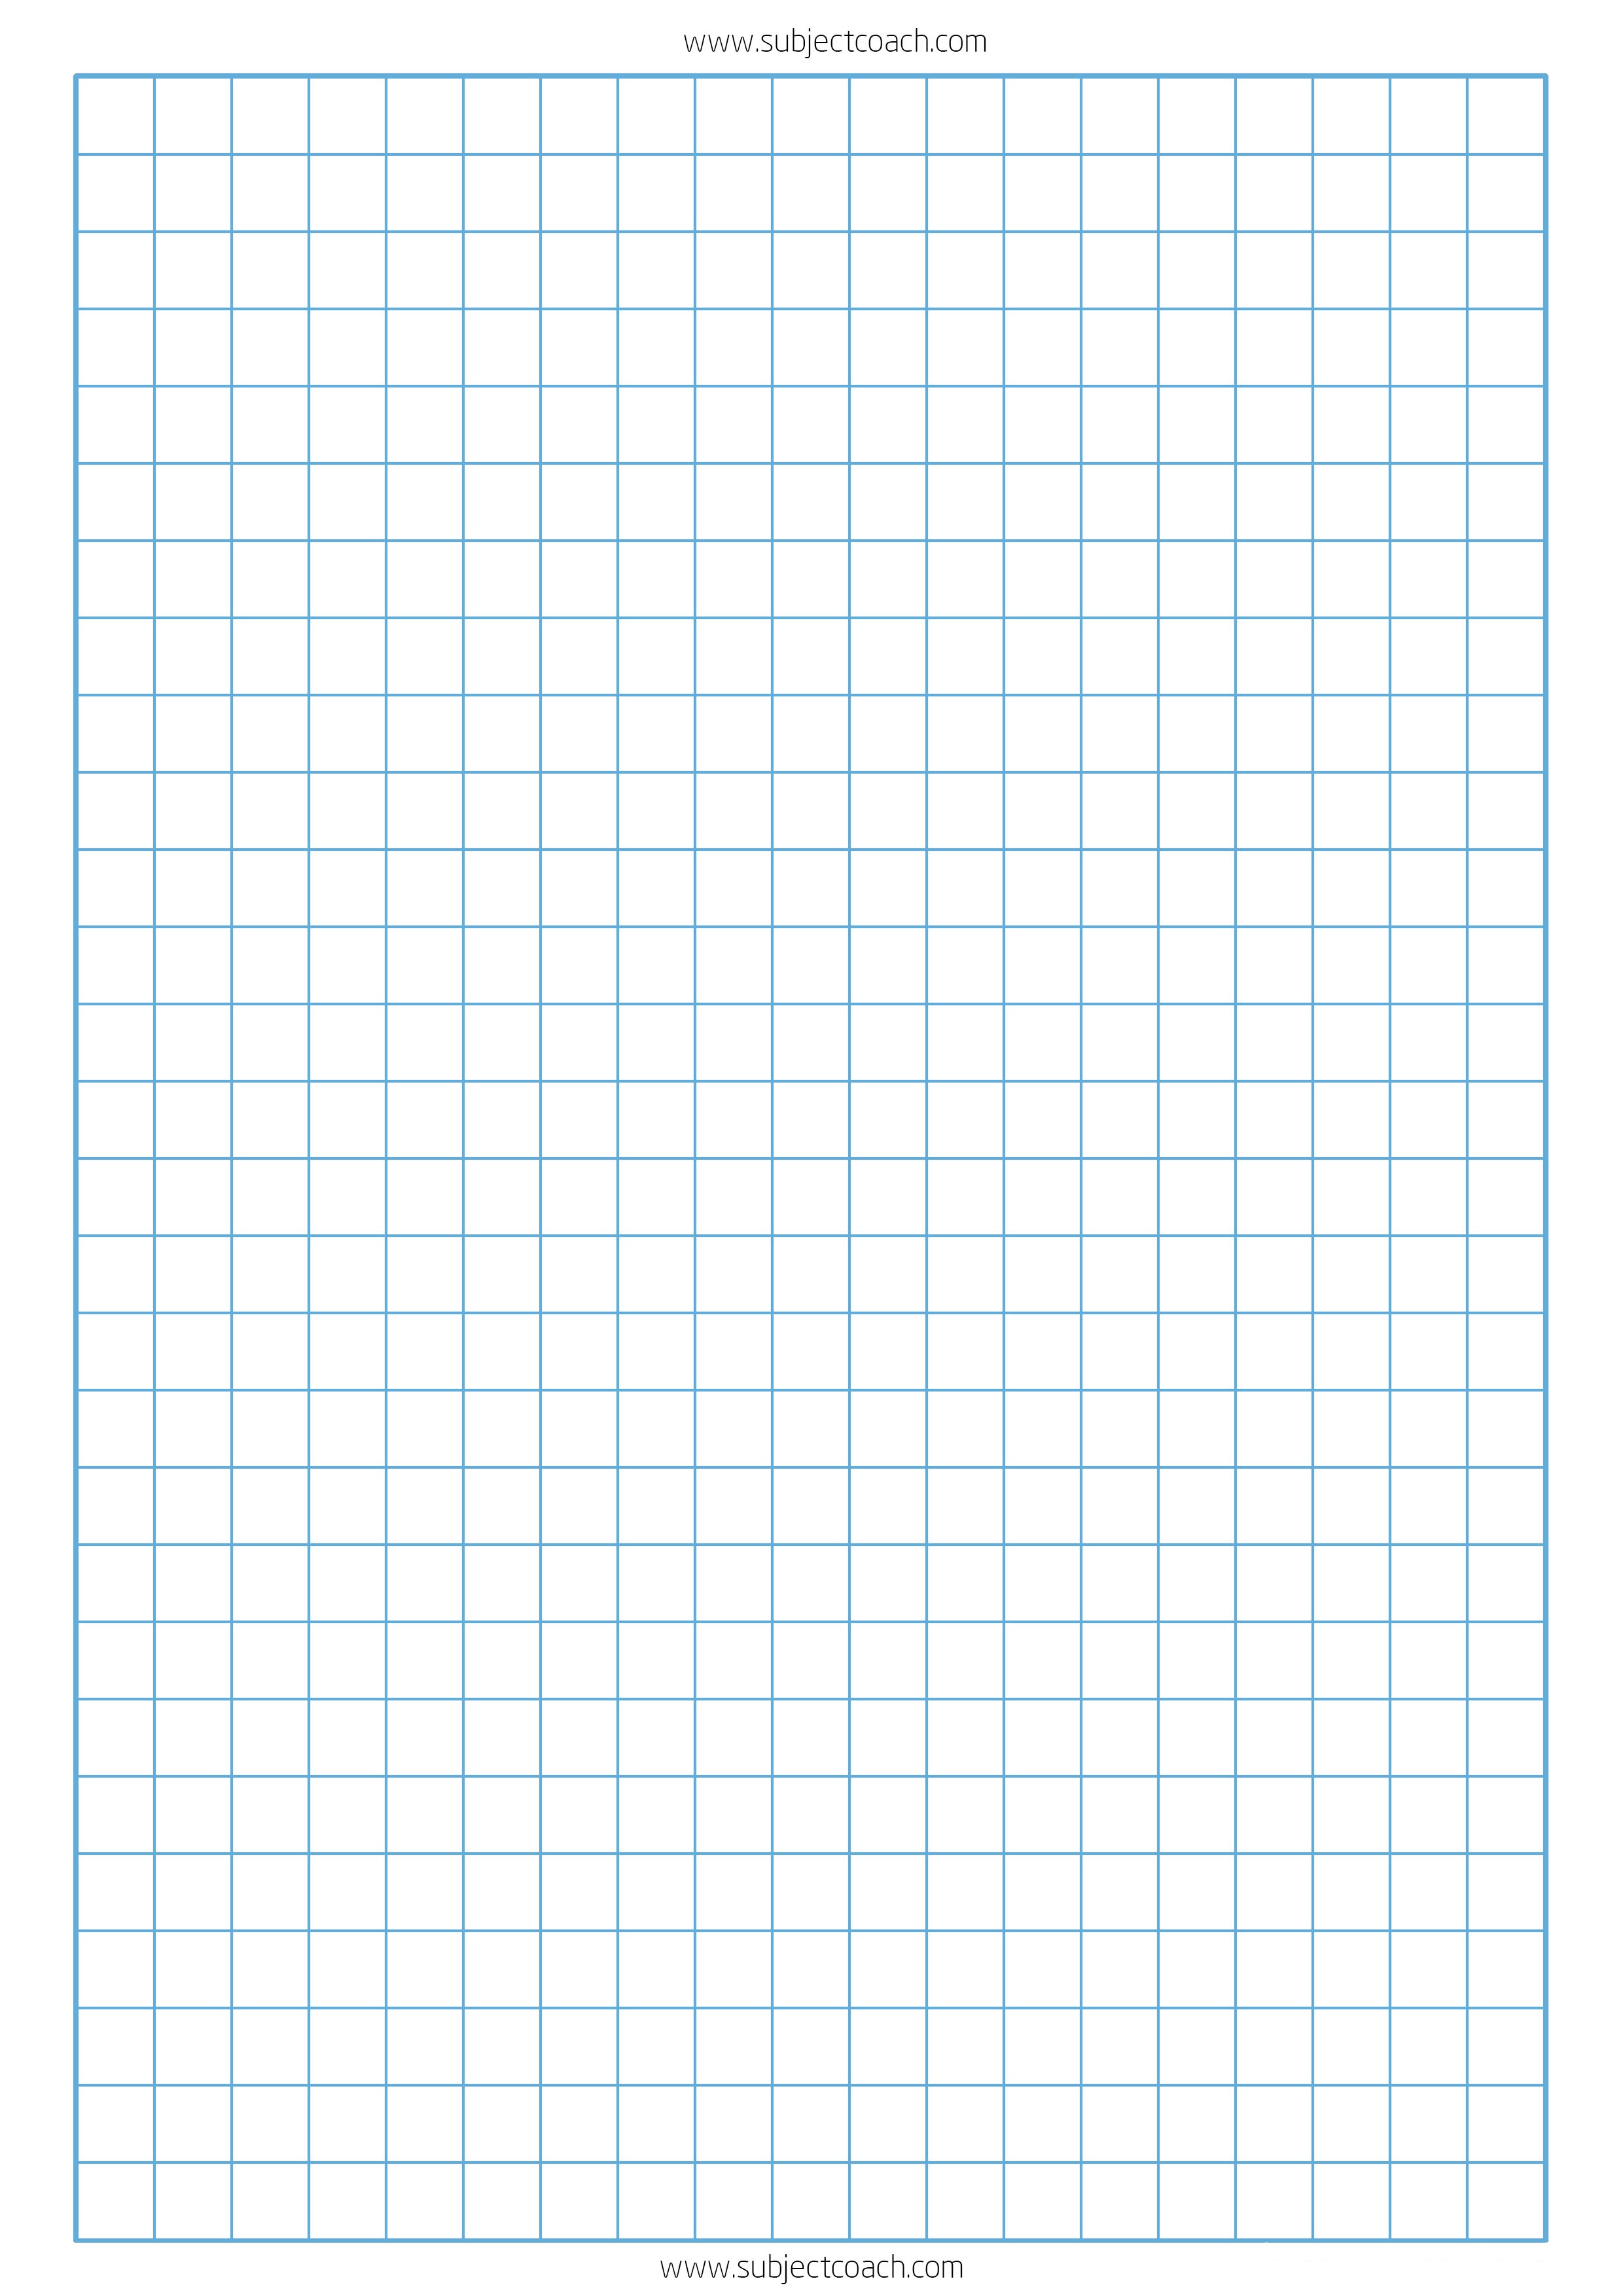 Free Printable Graph Paper 1Cm For A4 Paper | Subjectcoach - Free Printable Squared Paper